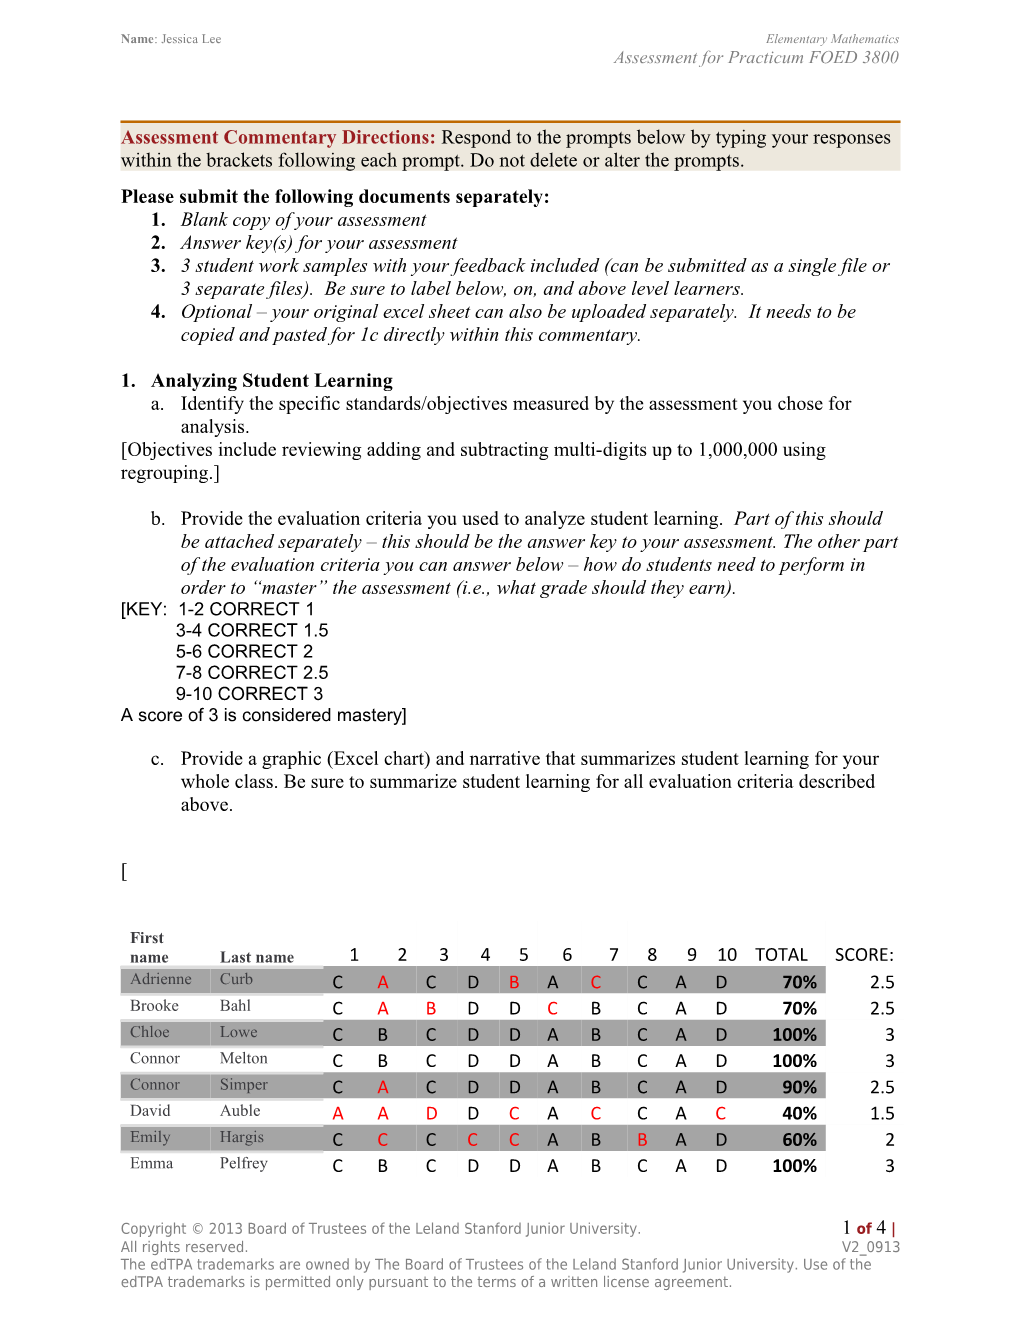 Assessment Commentary Template s1